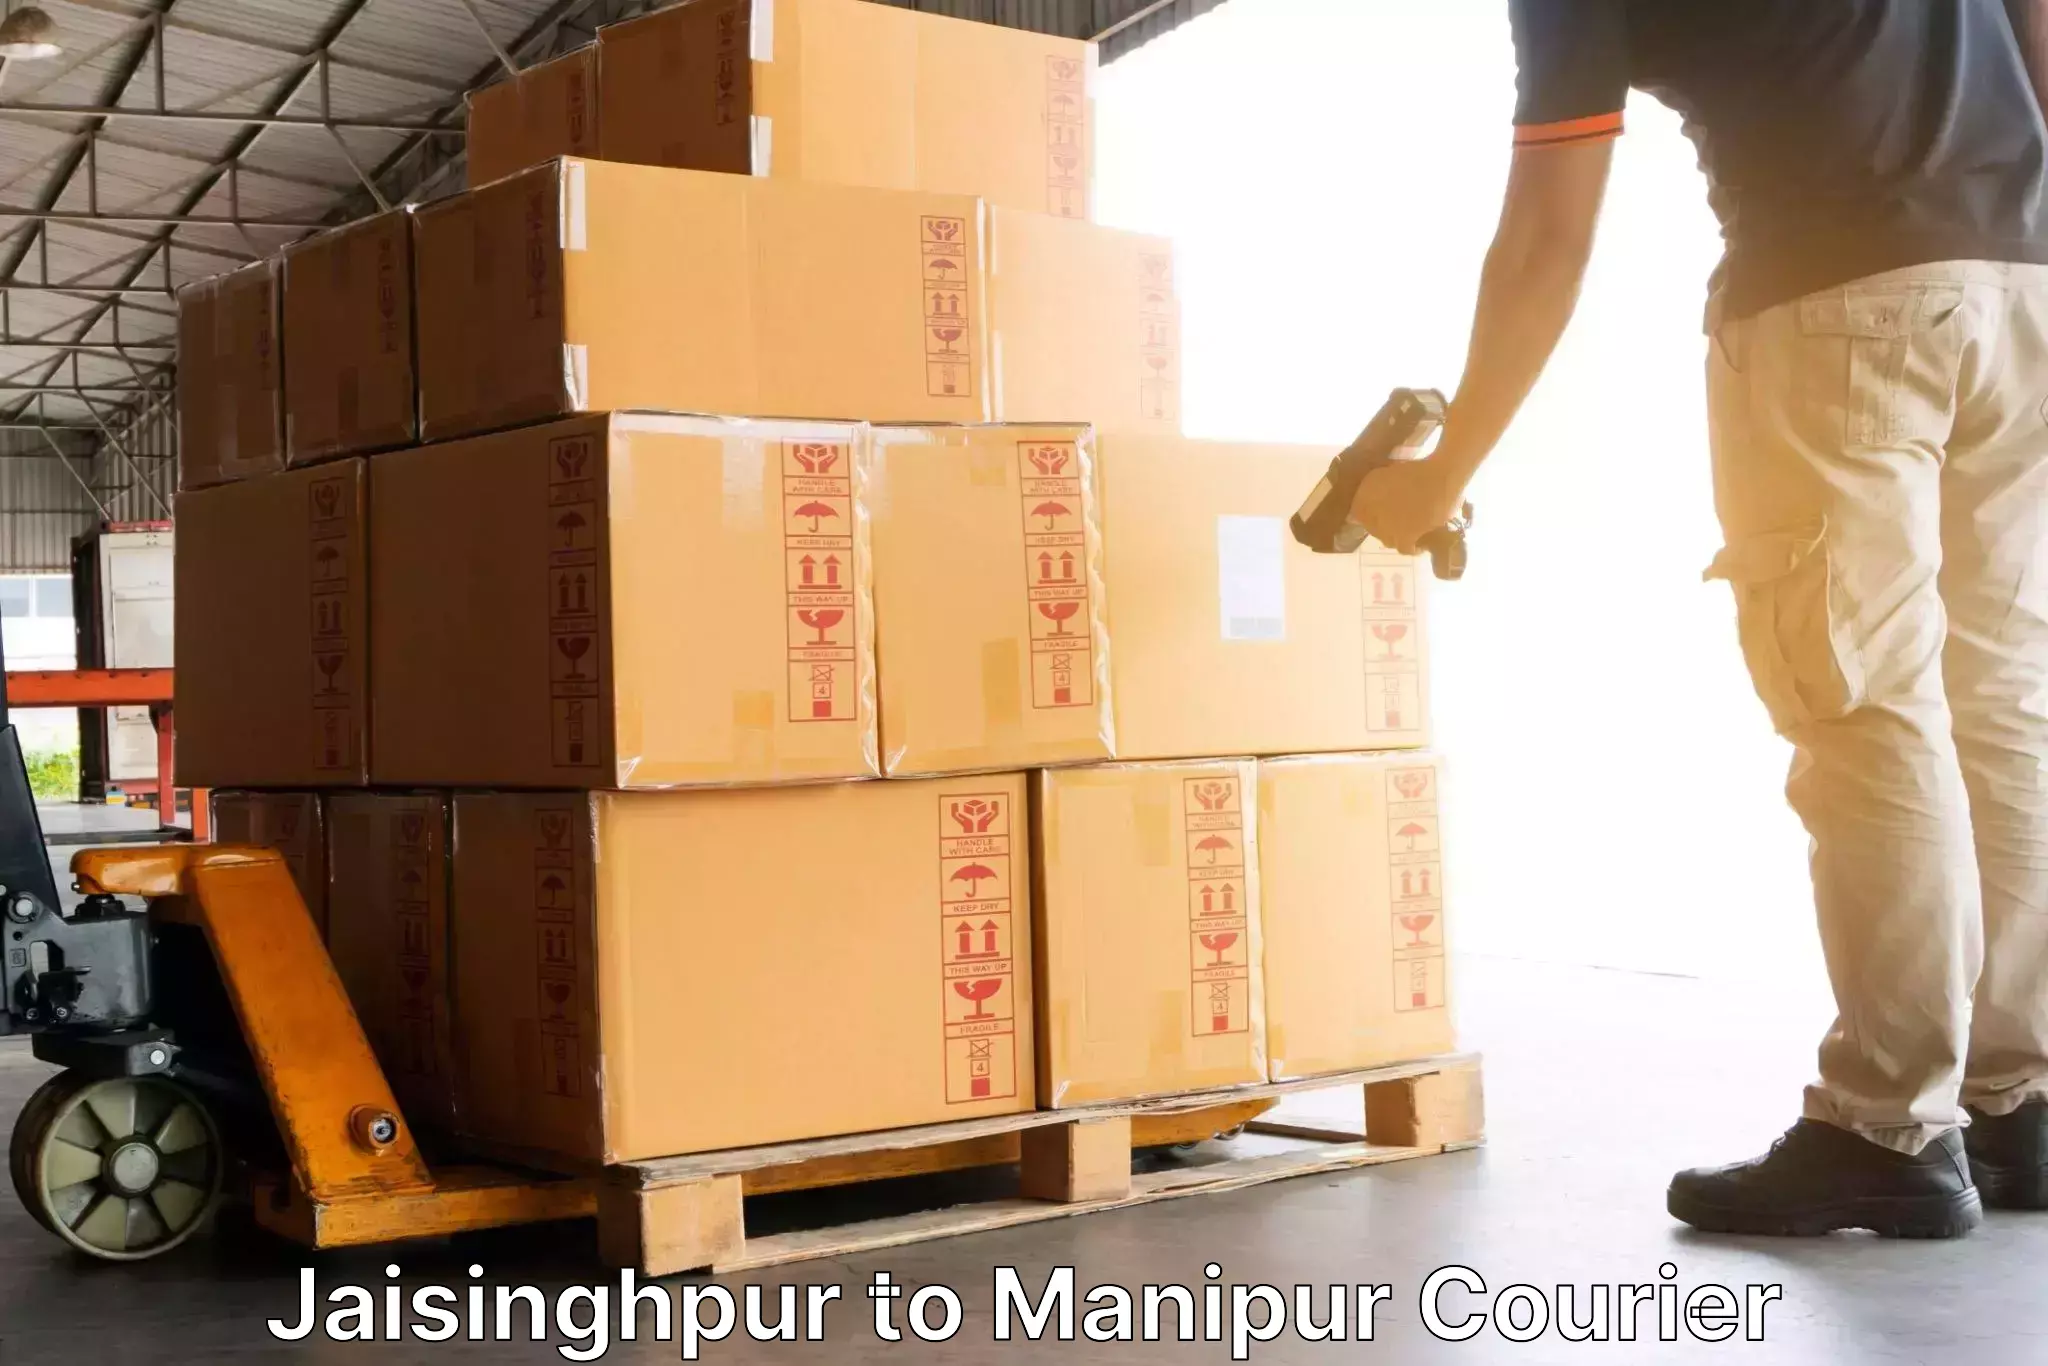 Efficient shipping operations in Jaisinghpur to Chandel